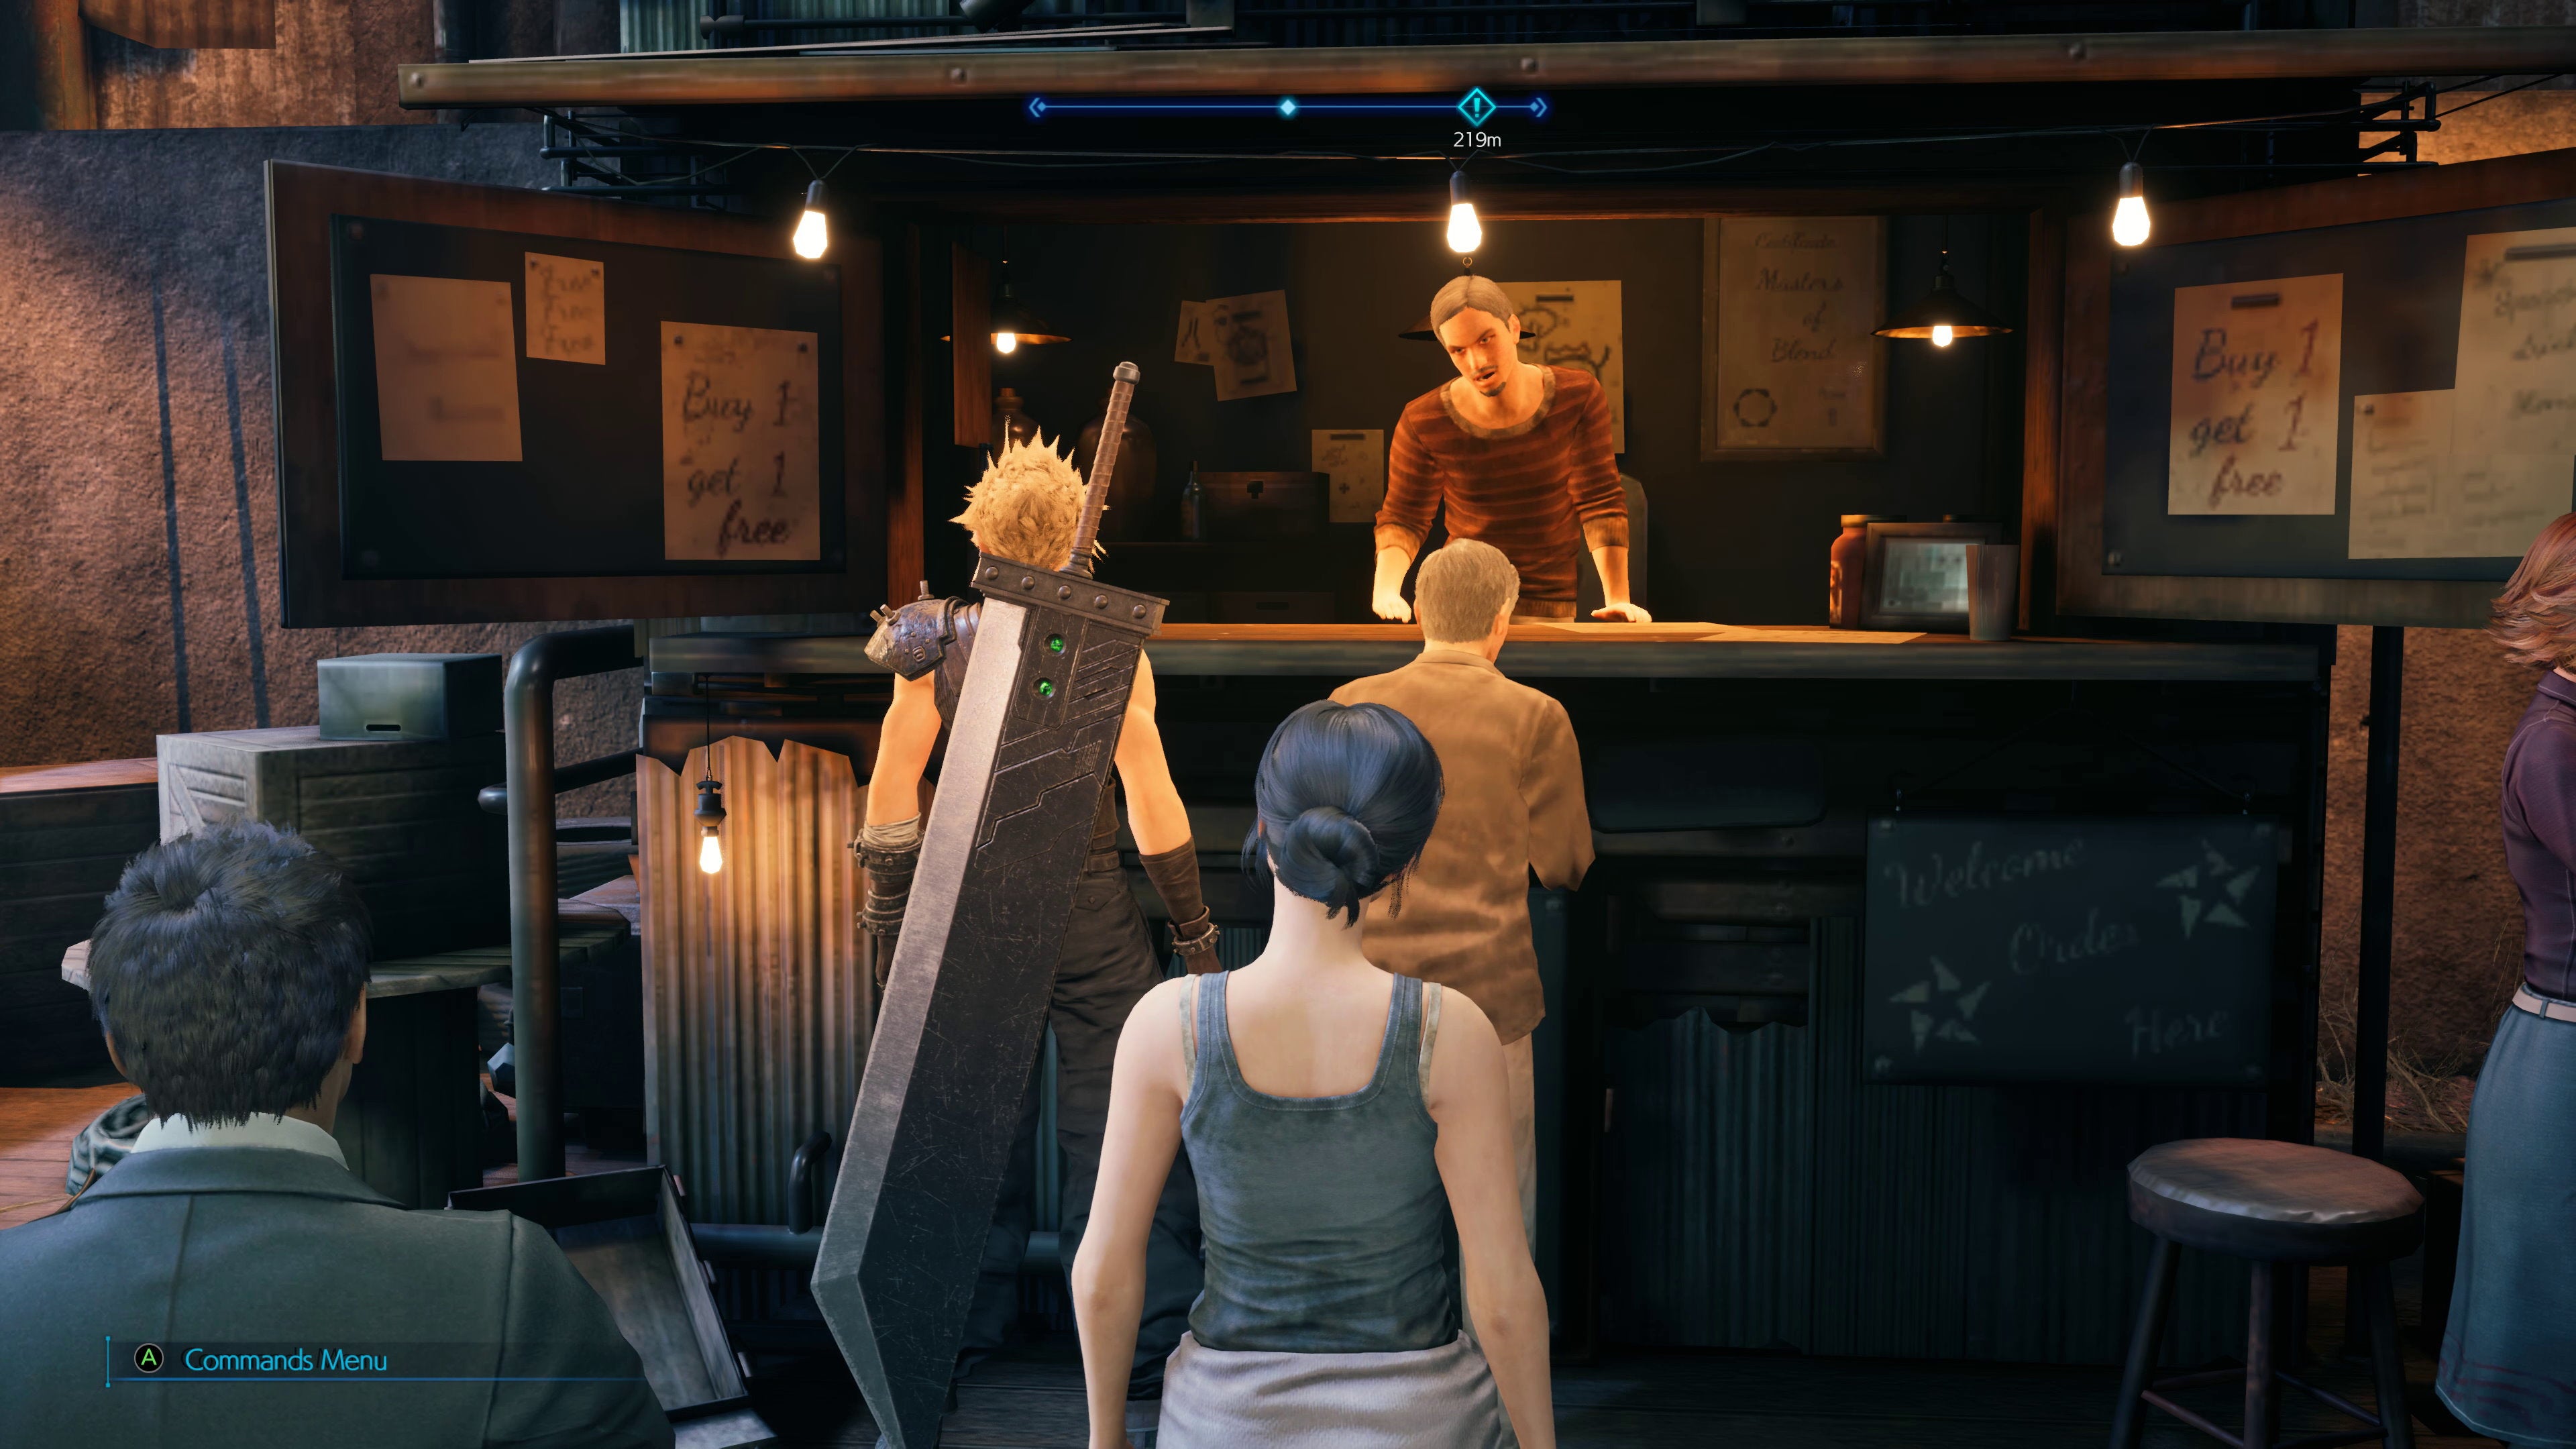 Cloud stands in front of a market stall in Final Fantasy VII Remake Intergrade